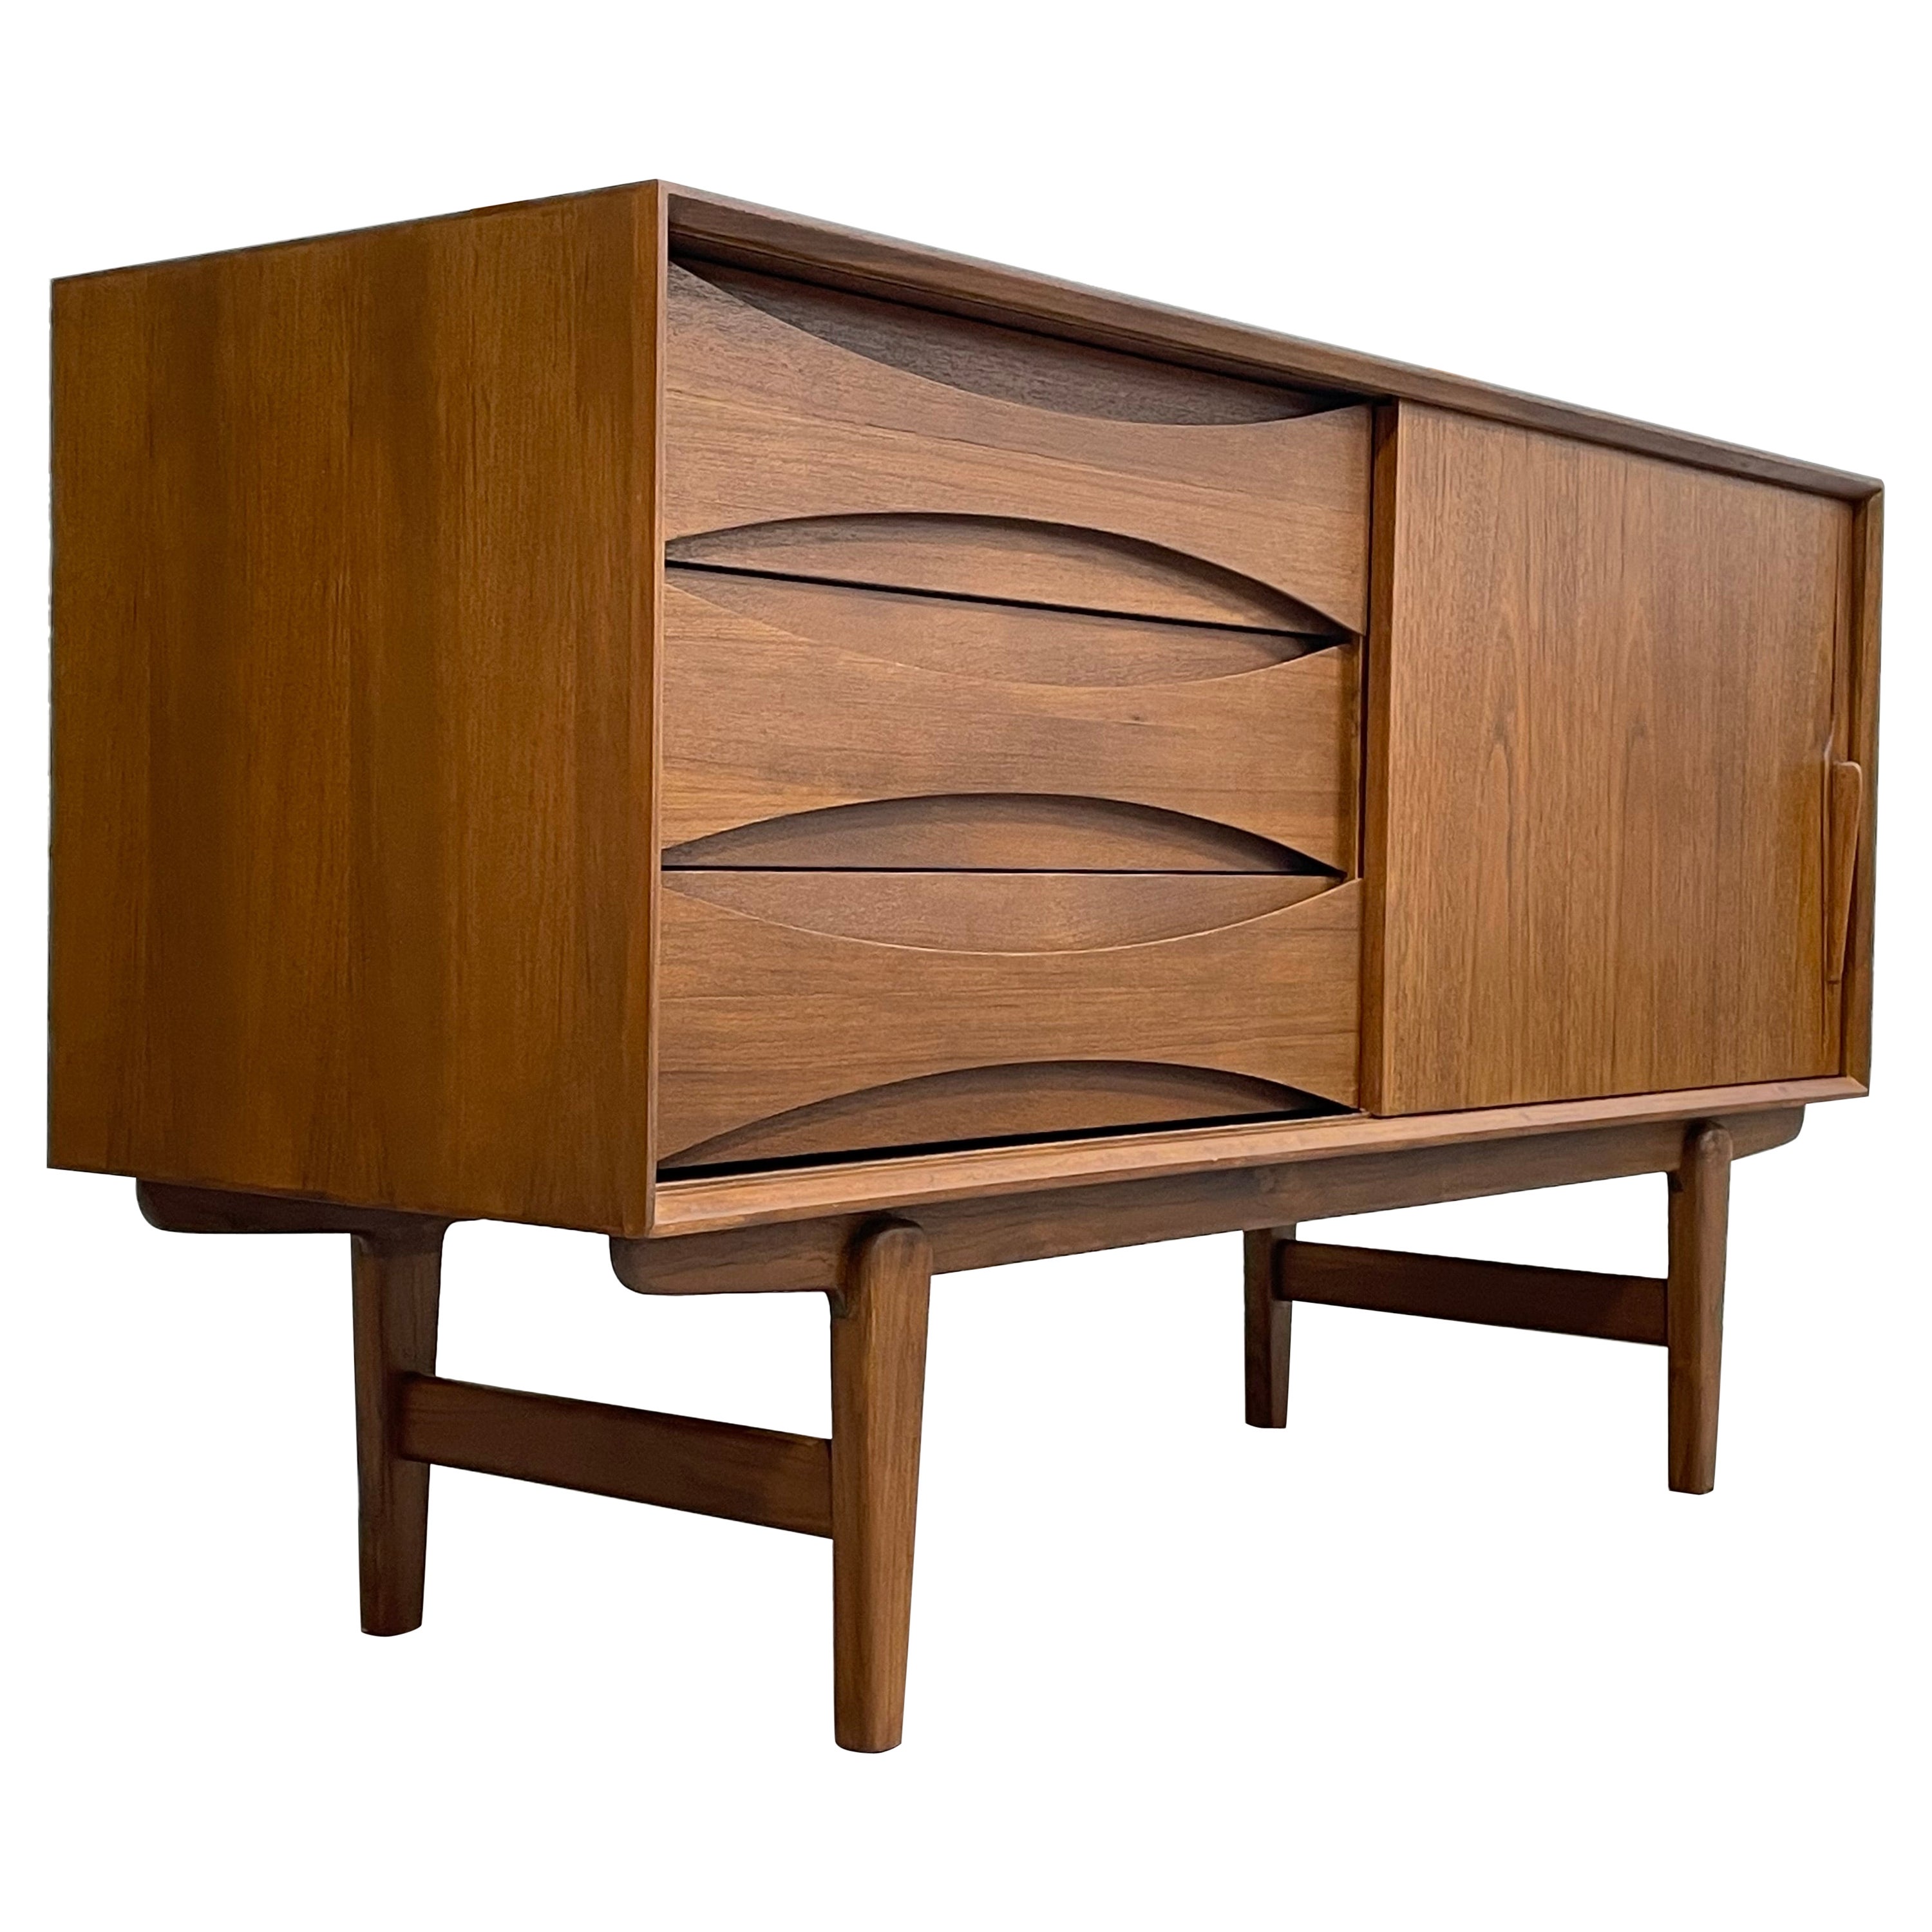 APARTMENT sized Mid Century MODERN styled Teak CREDENZA media stand For Sale